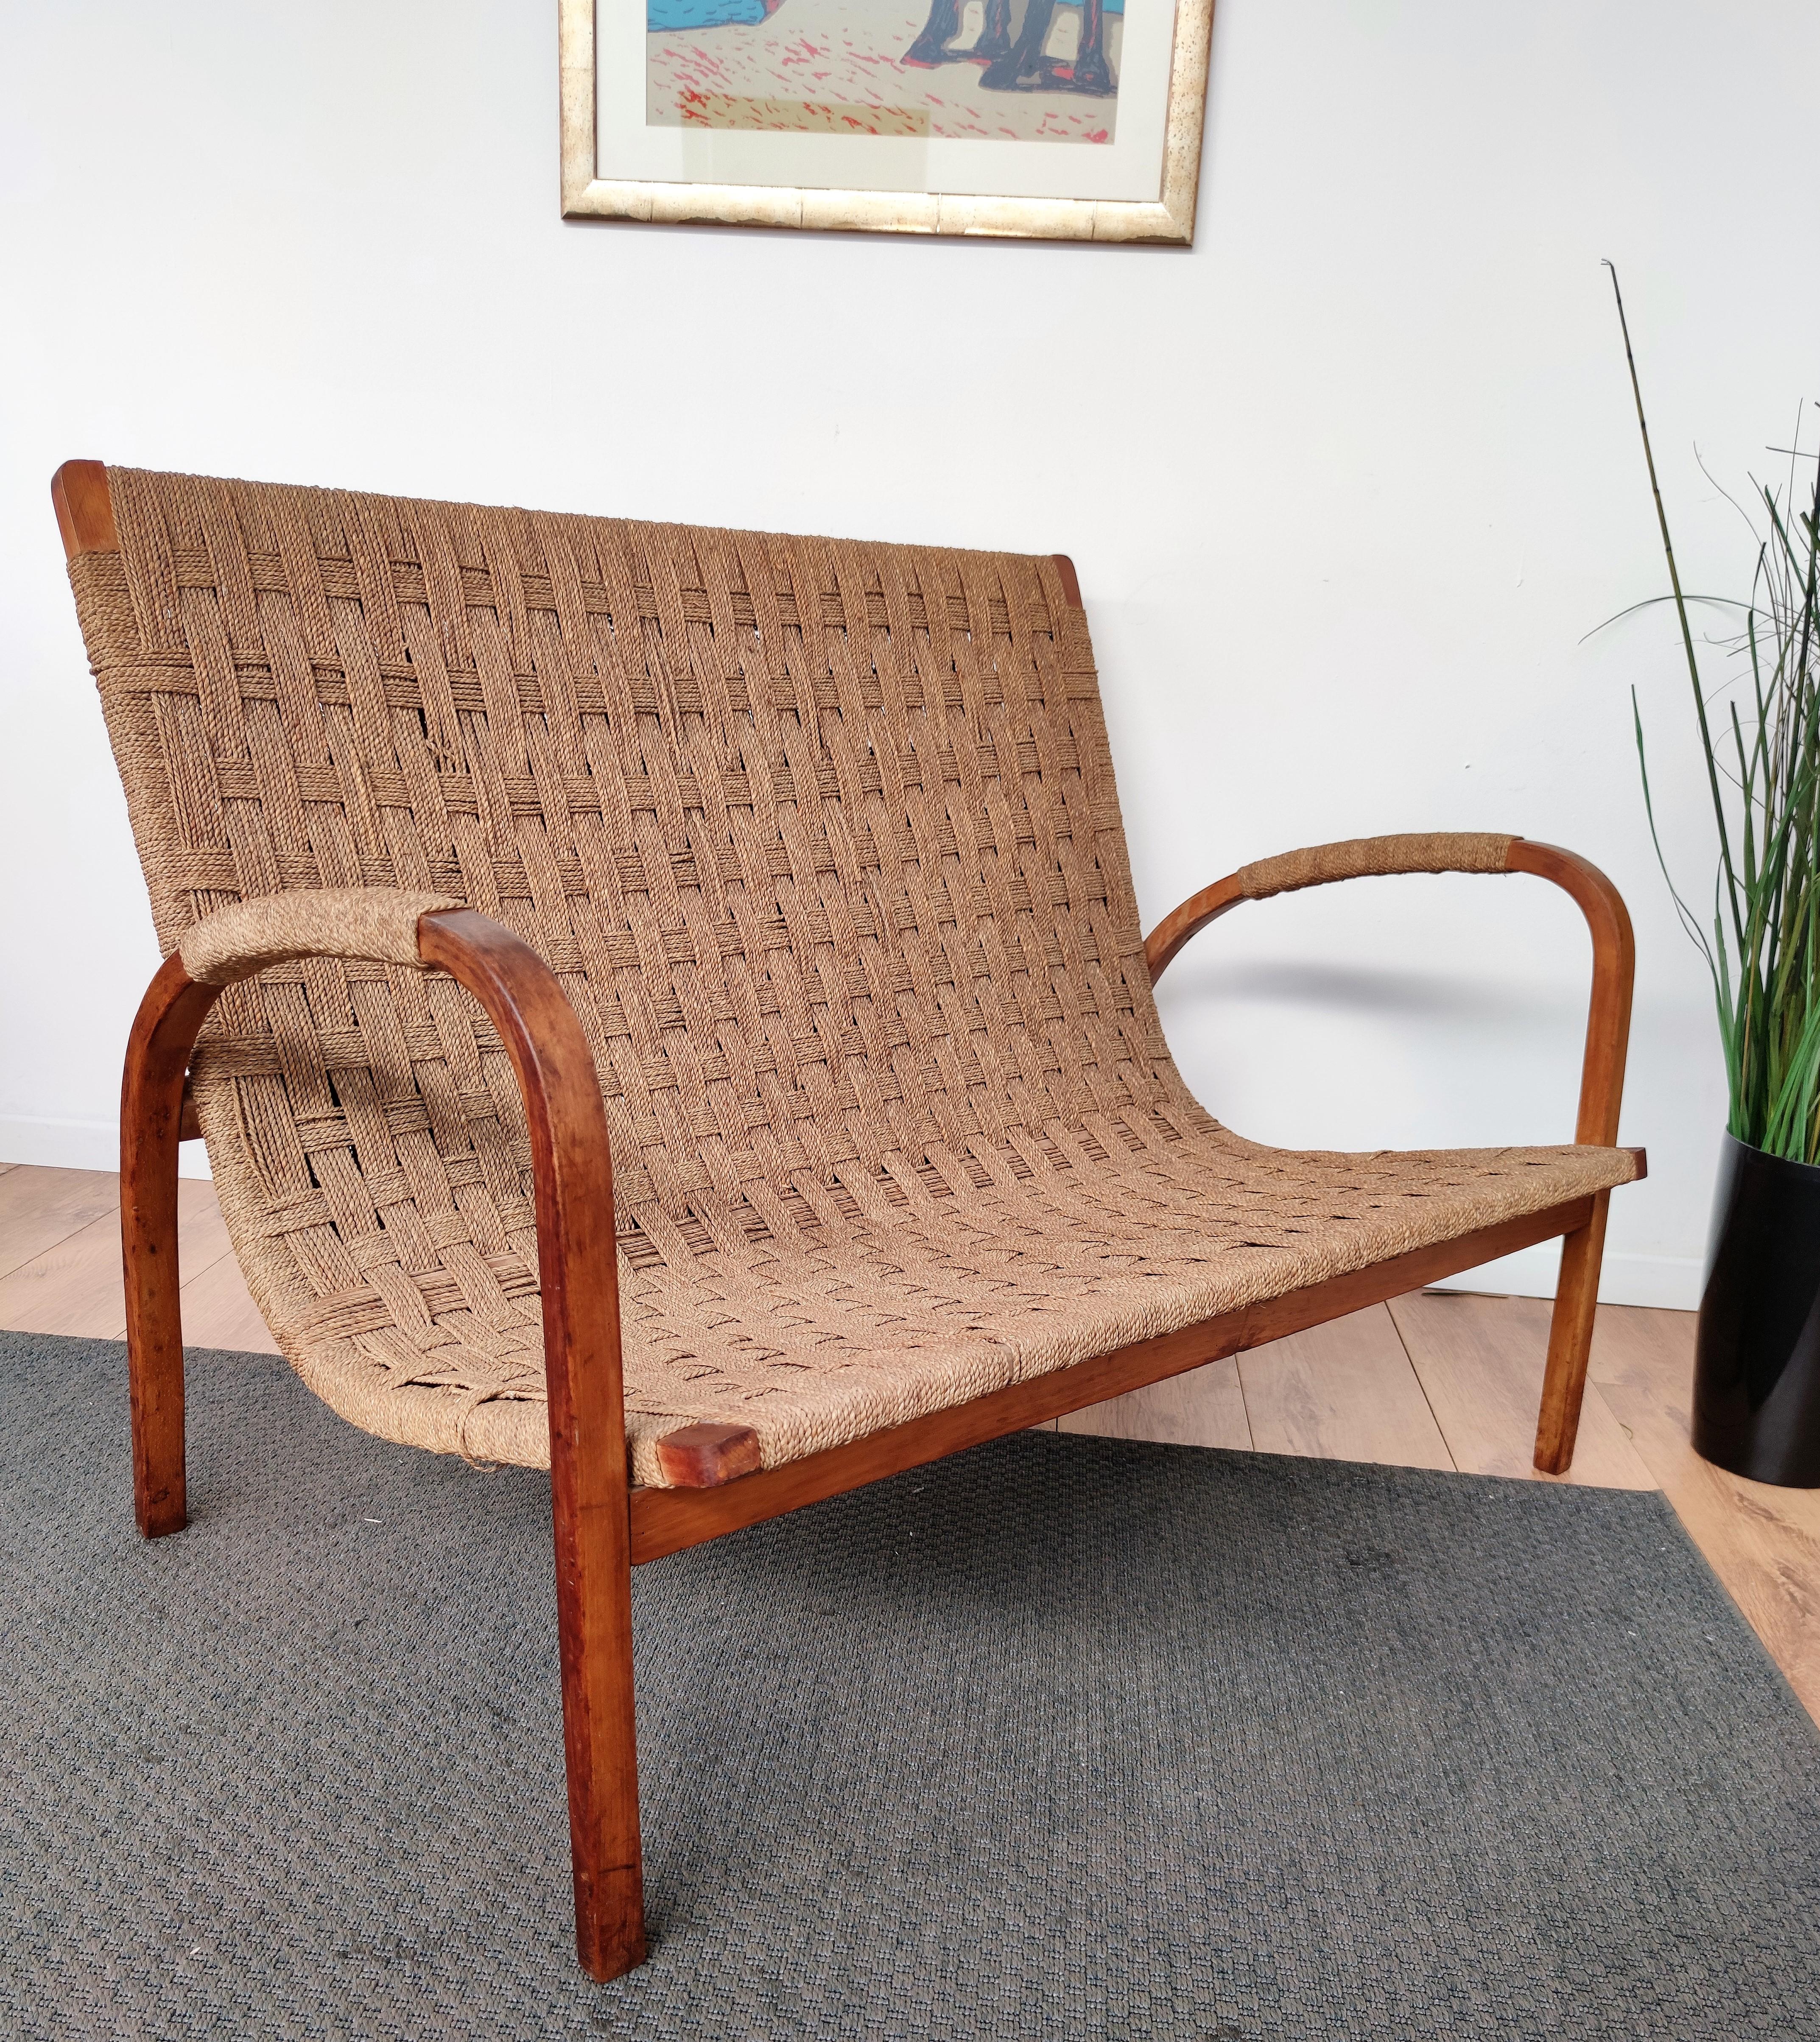 Mid-Century Modern 1960s Italian Midcentury Wood and Cord Woven Rope Lounge Bench Armchair For Sale